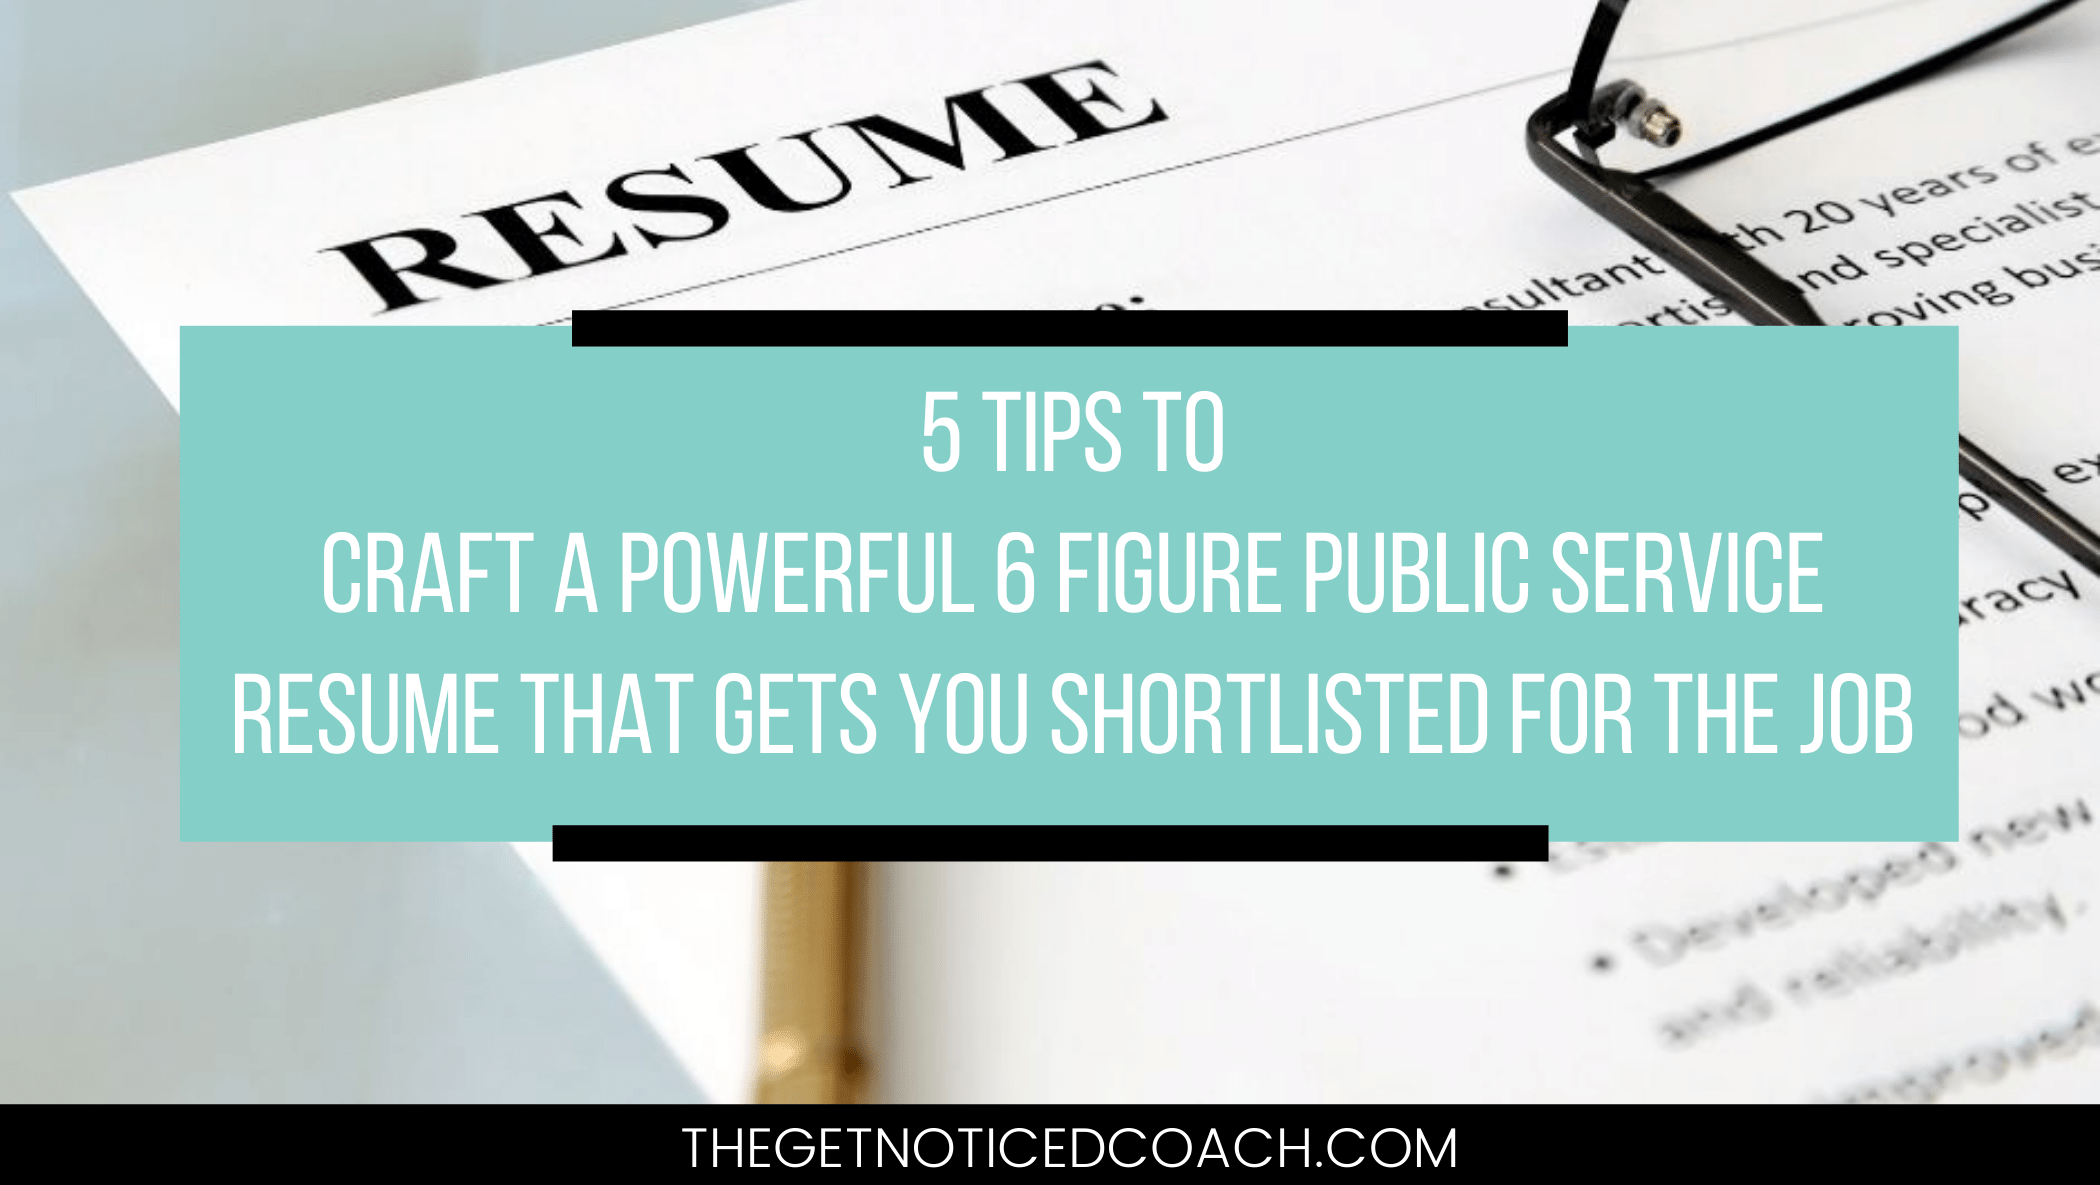 5 tips to craft a powerful 6 figure public service resume get shortlisted for the job